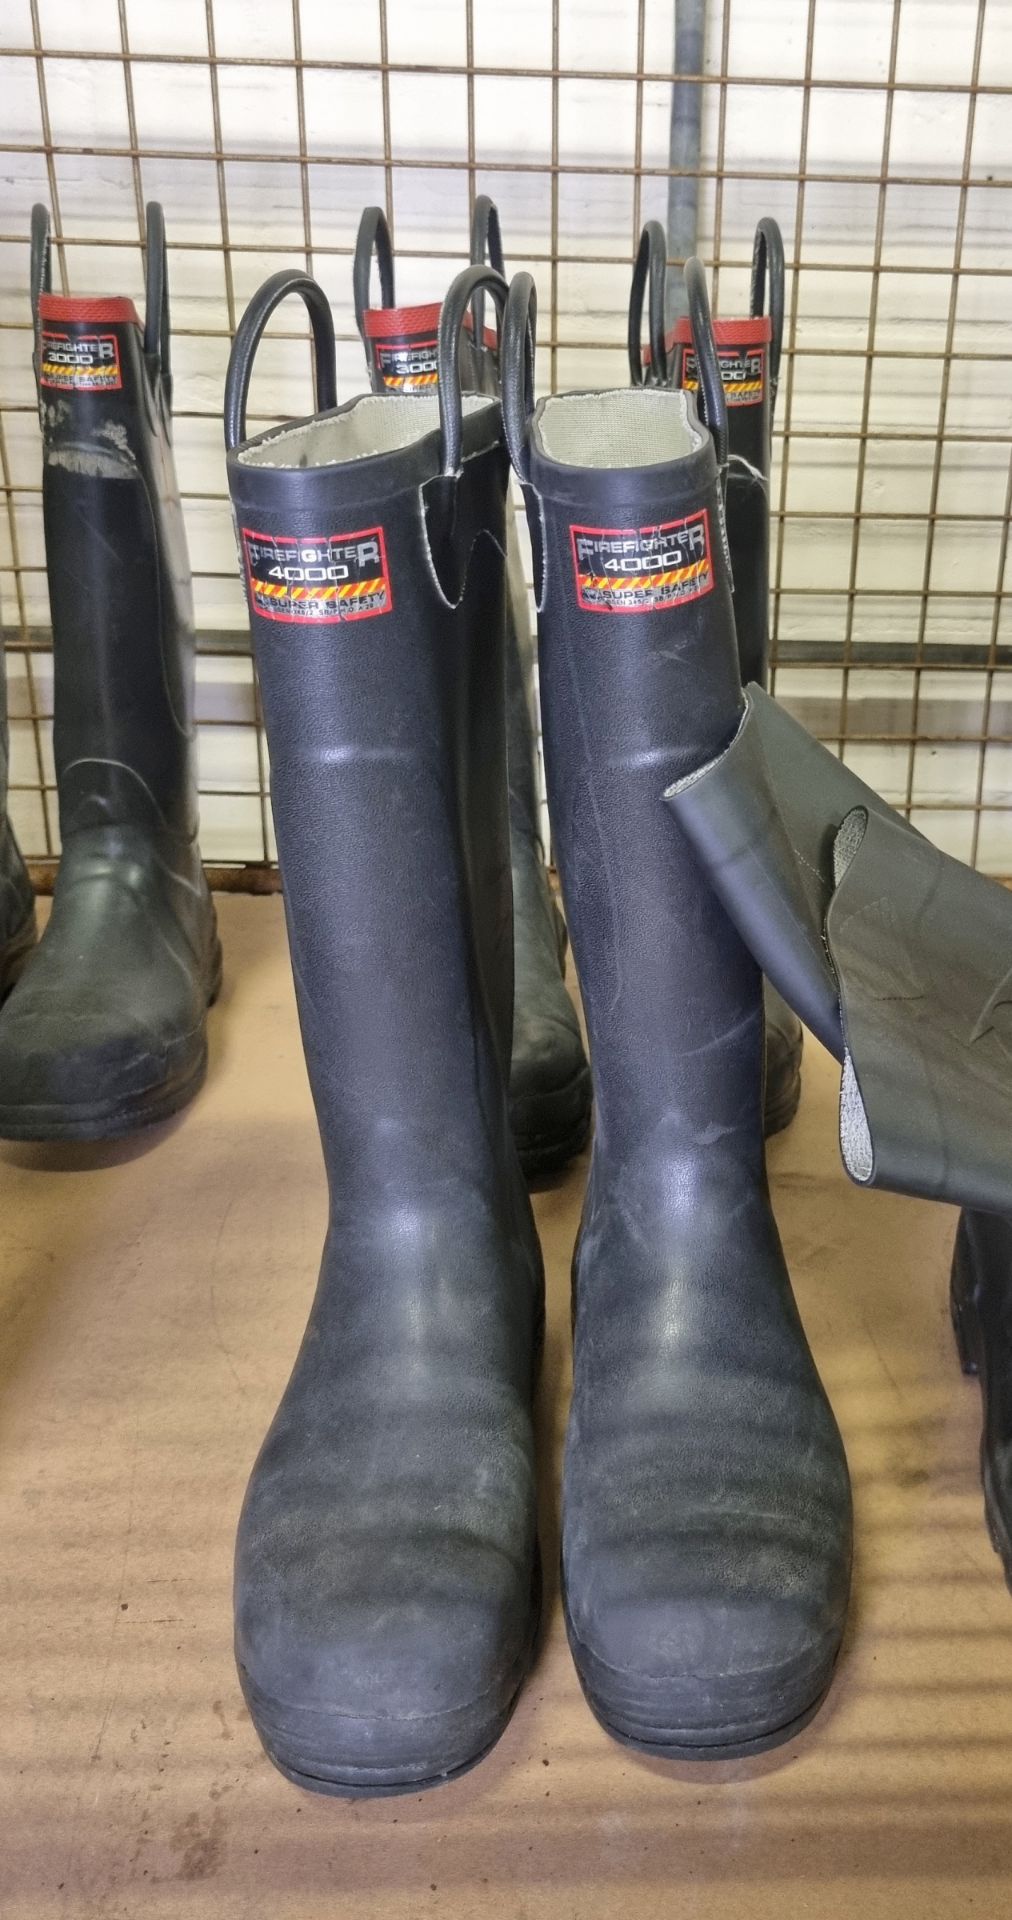 3x FF 3000 rubber safety boot - size 4, FF 3000 rubber safety boot - size 6, FF 3000 rubber safety b - Bild 4 aus 6